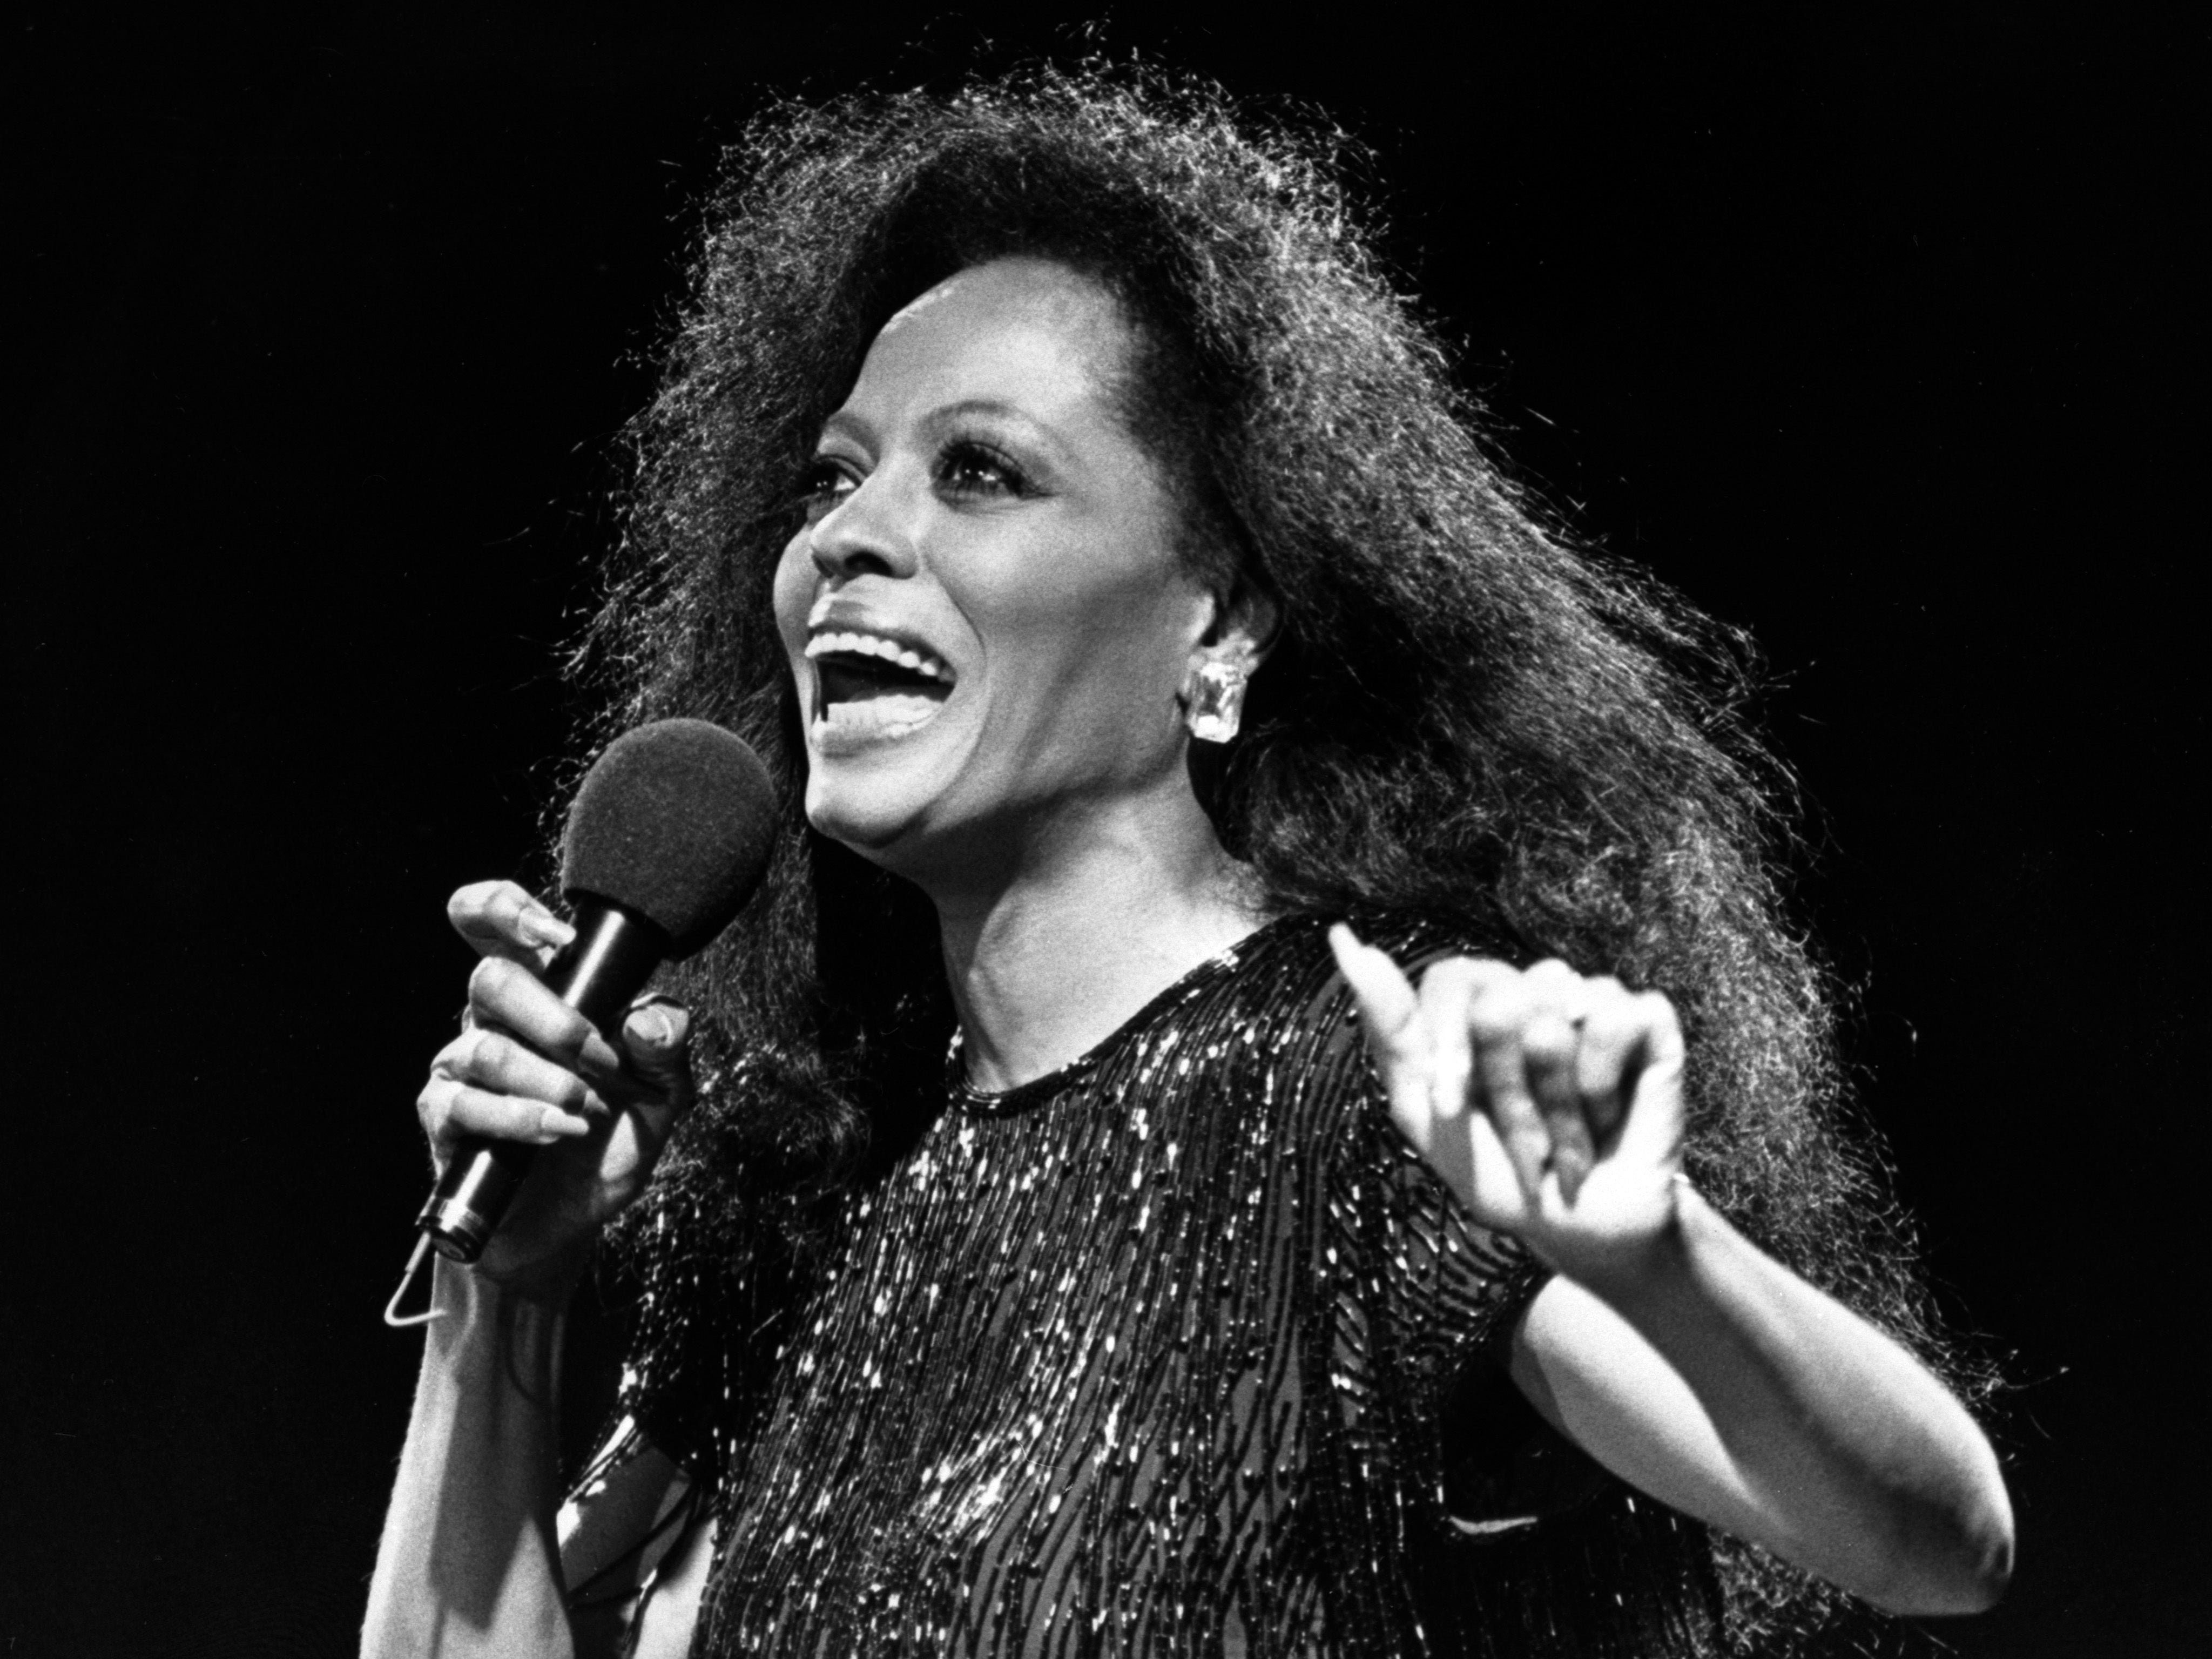 Diana Ross performing in 1989